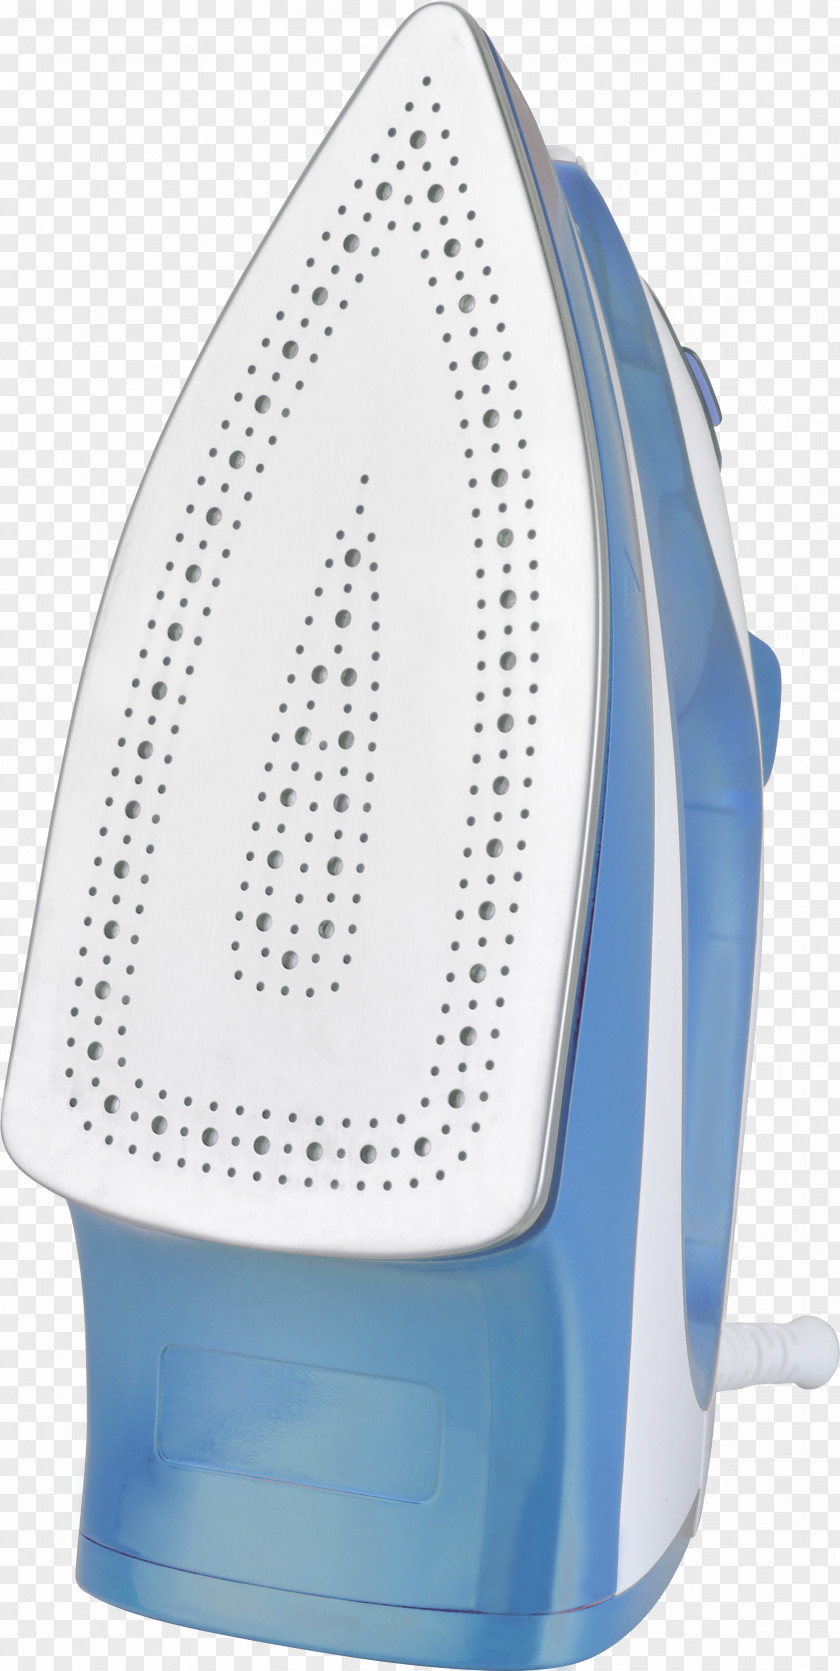 WRINKLED Clothes Iron Small Appliance Vapor Thermostat Steam PNG